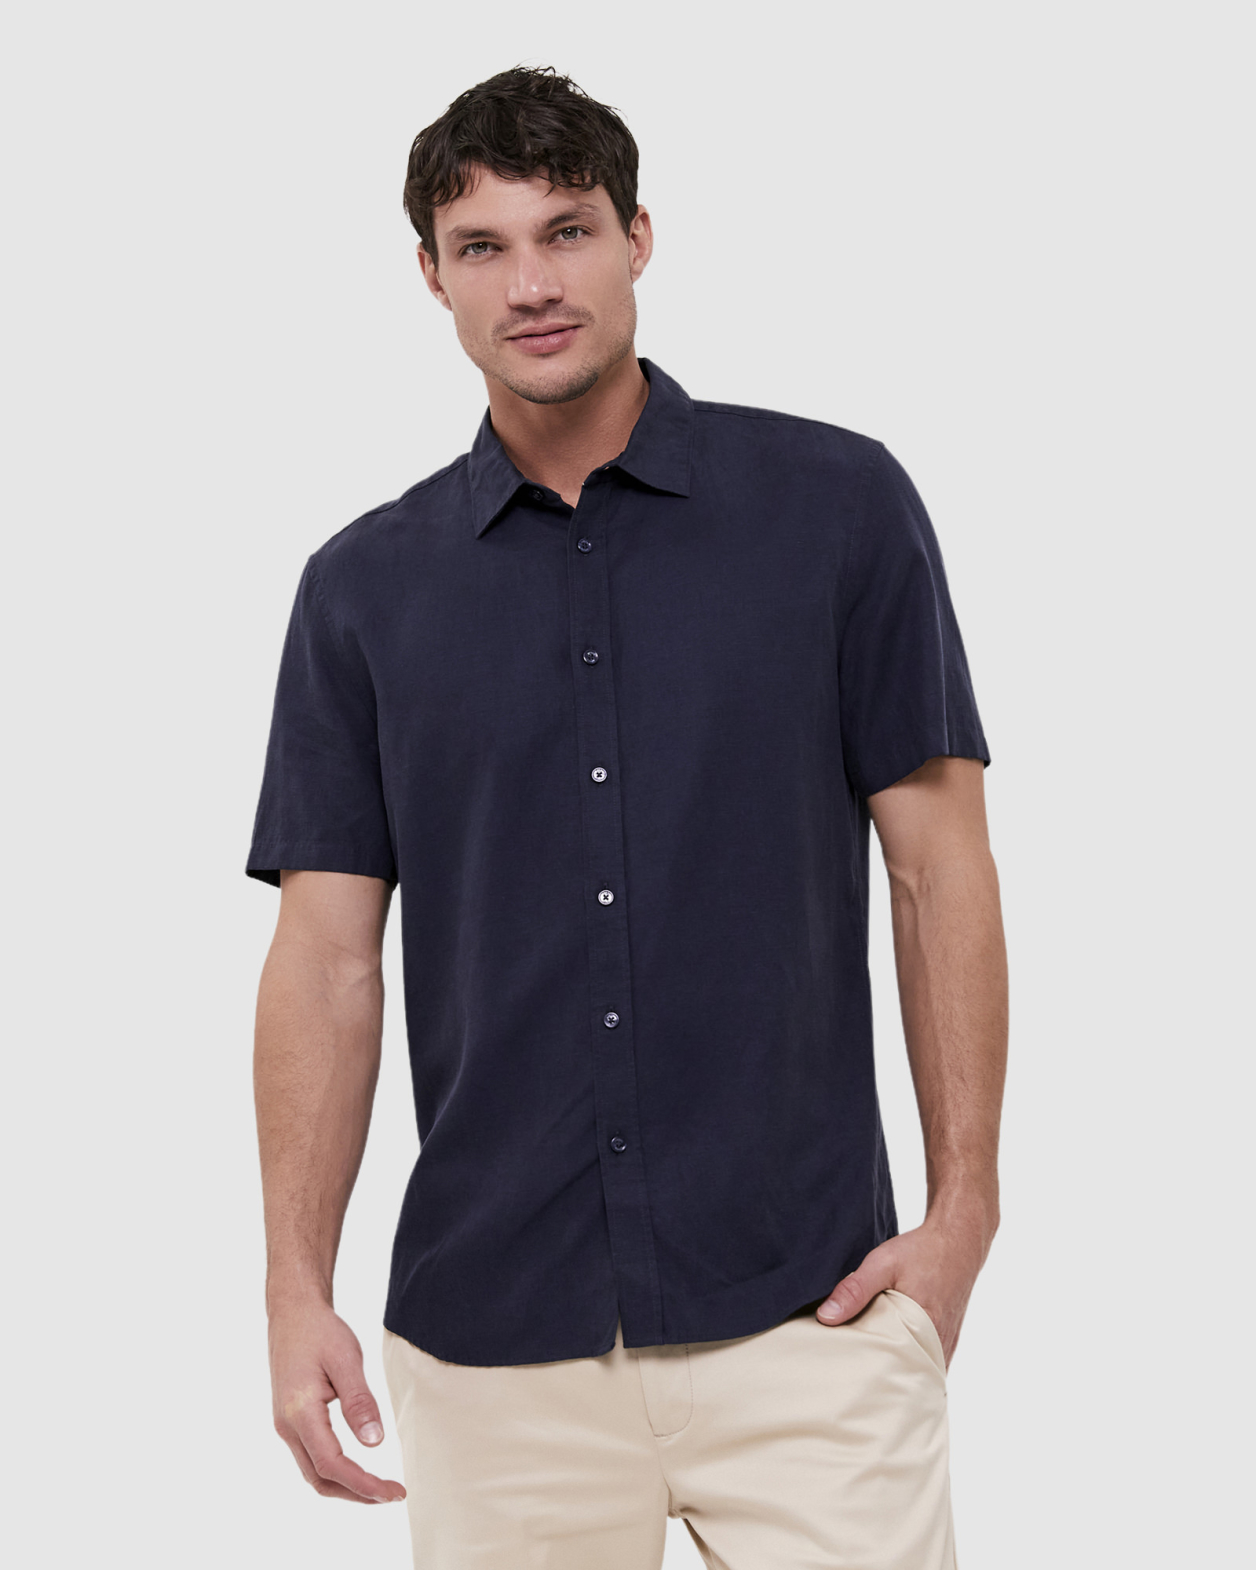 Sterne Short Sleeve Classic Shirt in INK